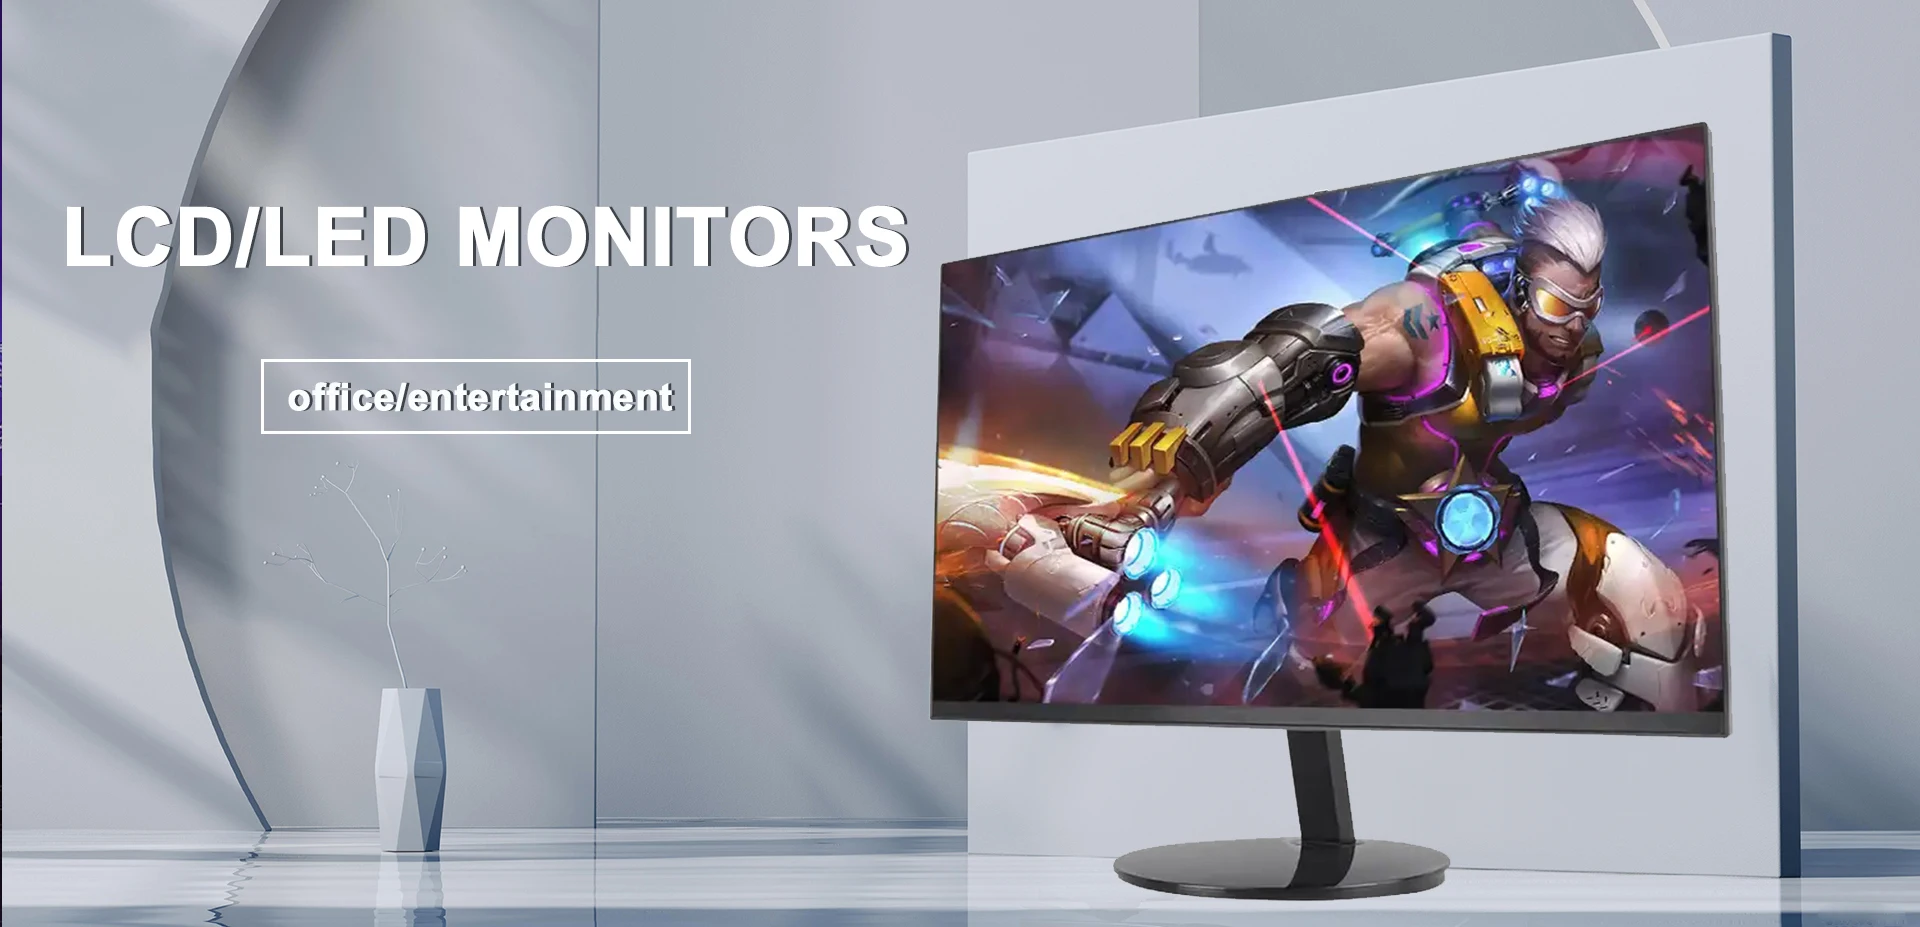 ABELOE (HK) TECHNOLOGY CO., LIMITED - gaming monitor, LCD/LED Monitor